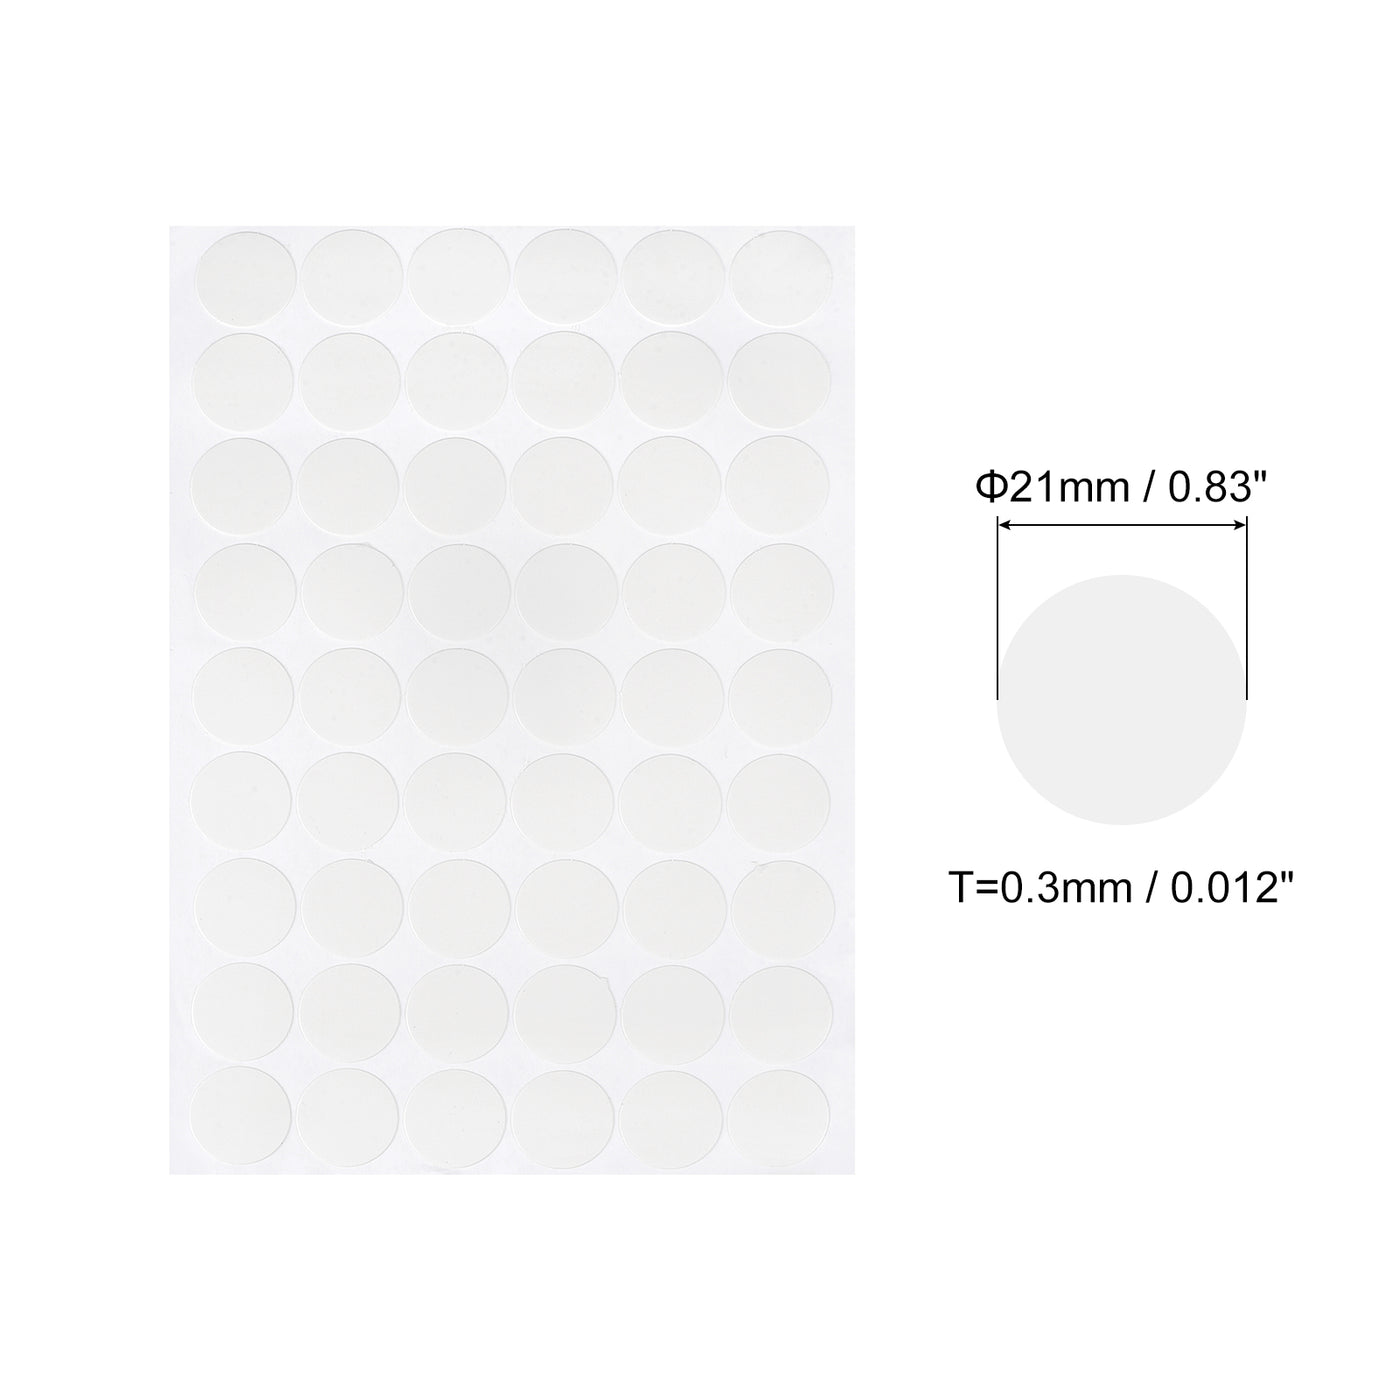 uxcell Uxcell Screw Hole Cover Stickers, 21mm Dia PVC Self Adhesive Covers Caps for Wood Furniture Cabinet Shelf Wardrobe, White 6 Sheet/324pcs